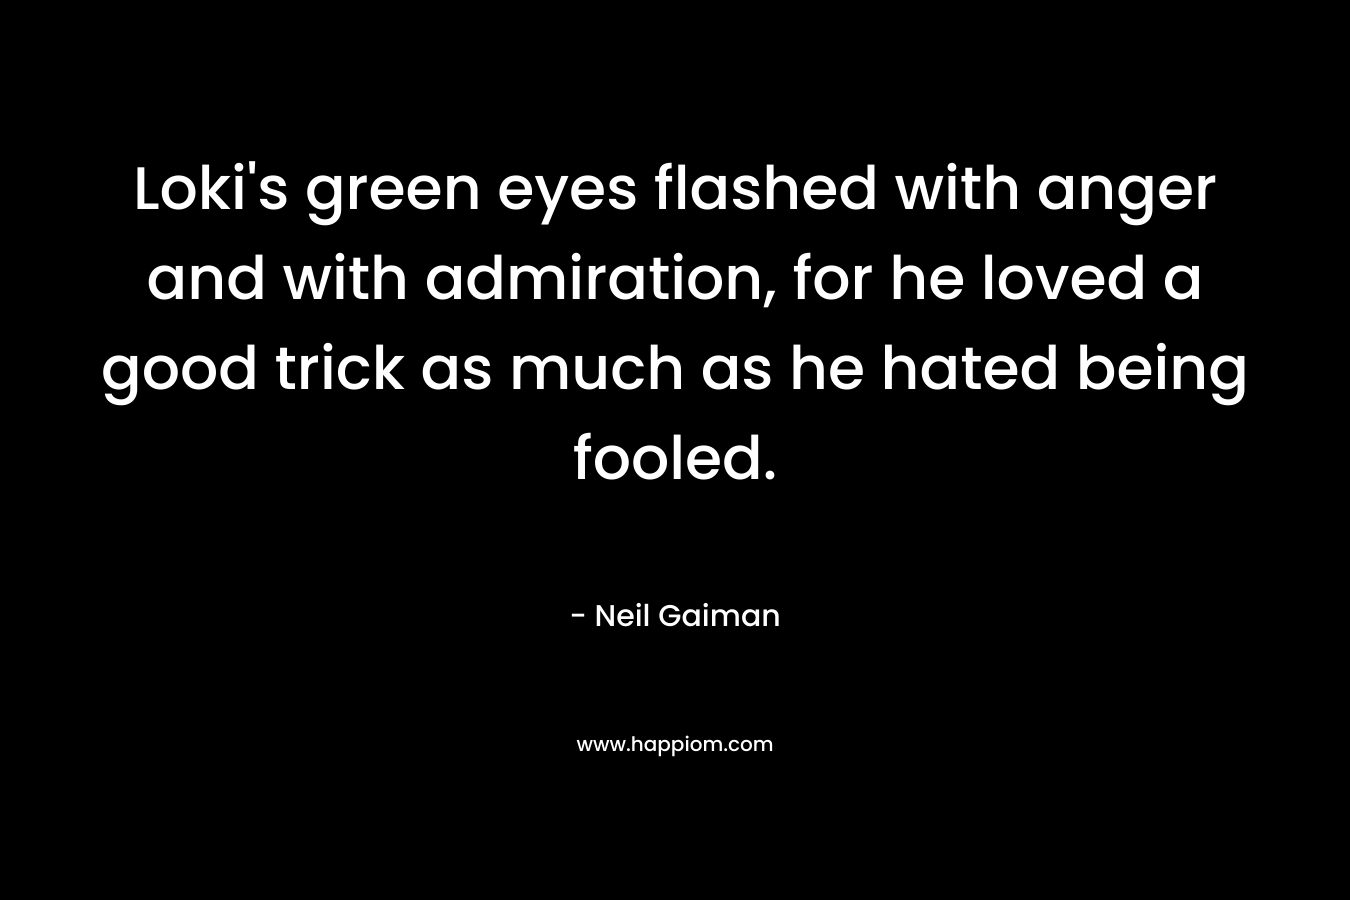 Loki’s green eyes flashed with anger and with admiration, for he loved a good trick as much as he hated being fooled. – Neil Gaiman